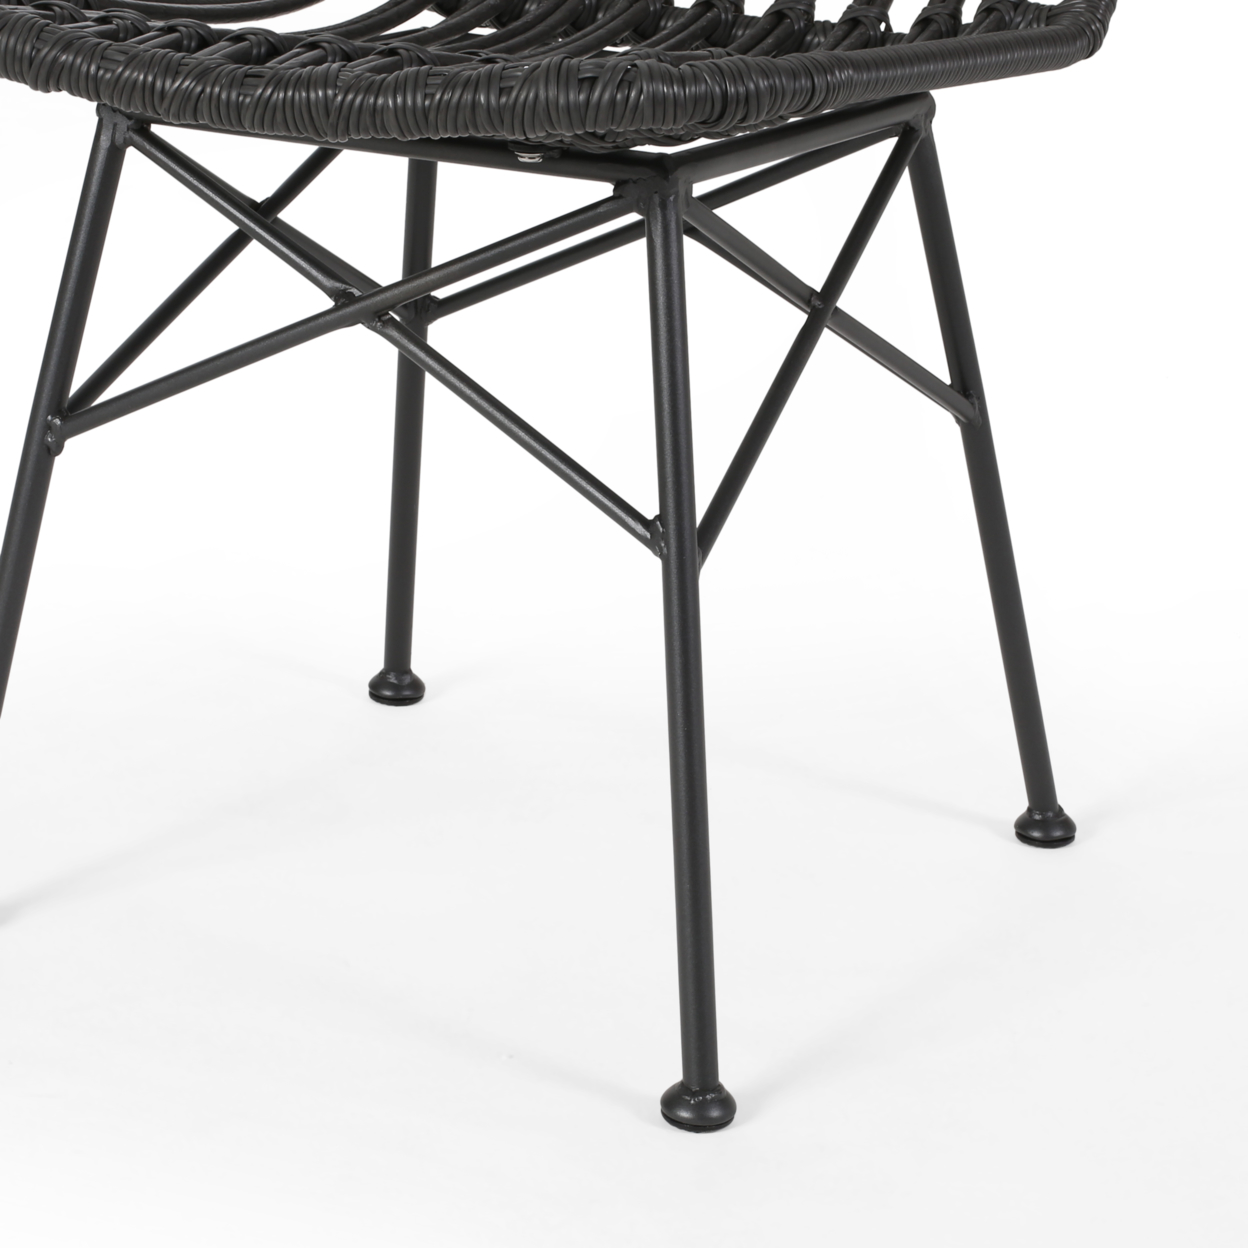 Yilia Outdoor Wicker Dining Chairs (Set Of 2) - Light Brown, Black